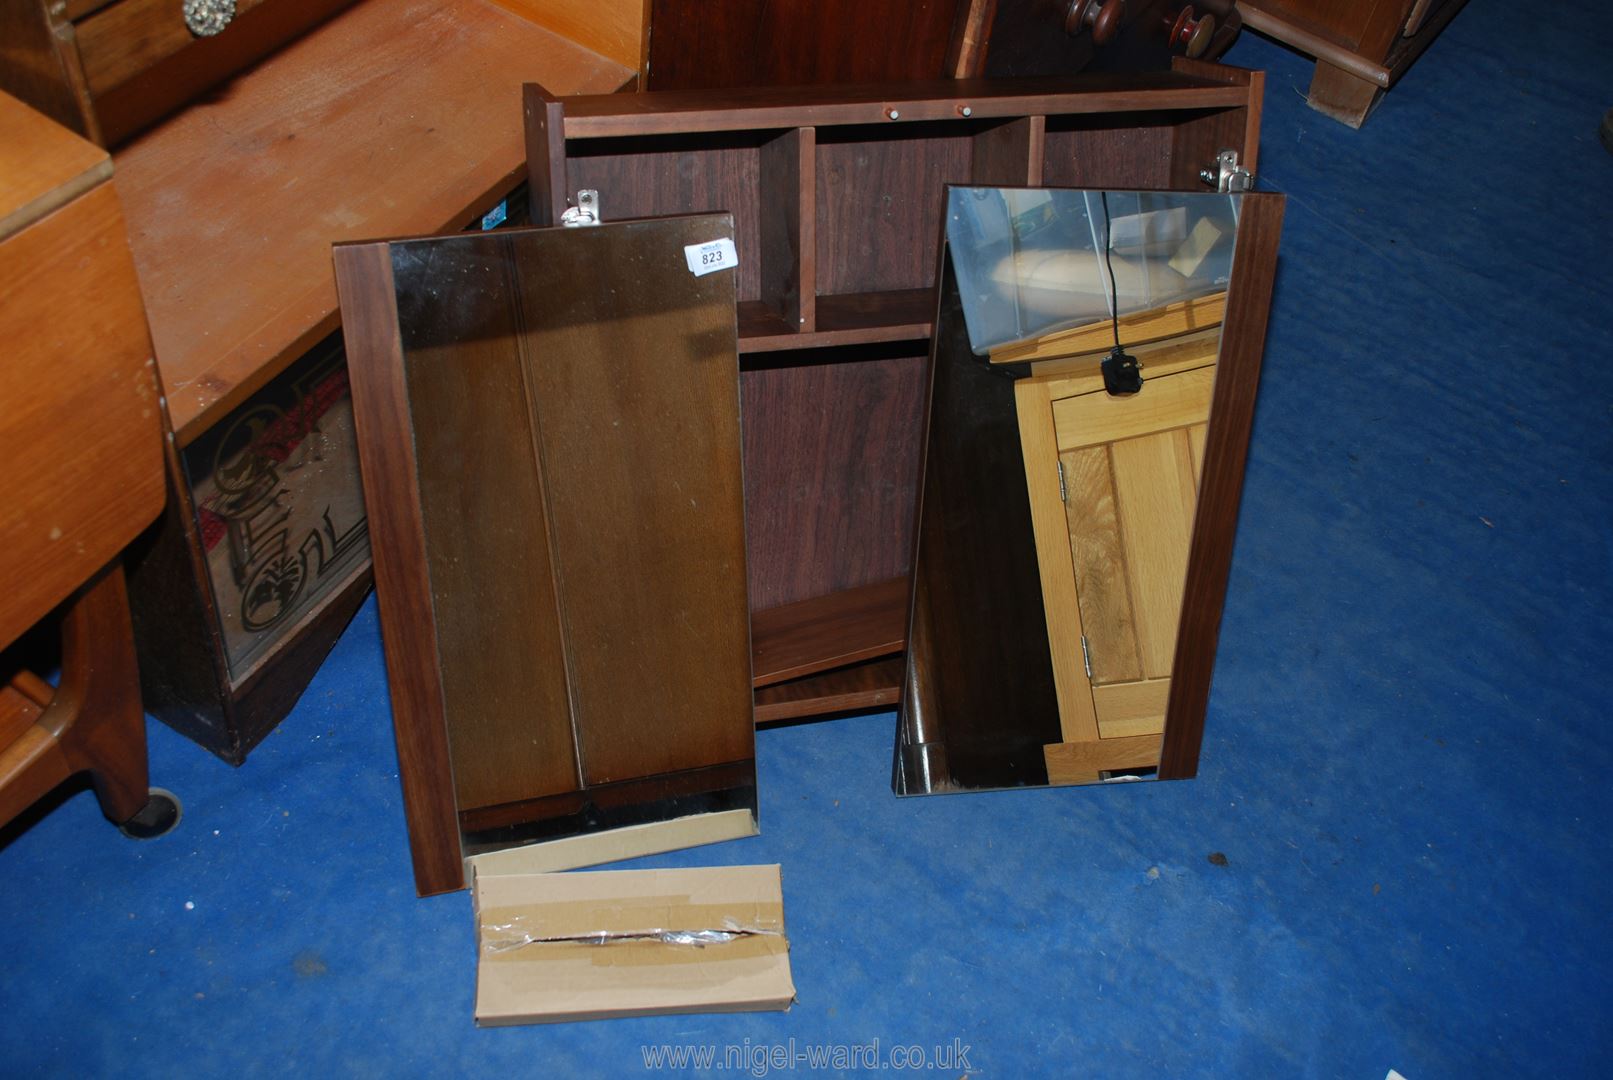 A flat pack mirror fronted cabinet 2' wide x 21" high.